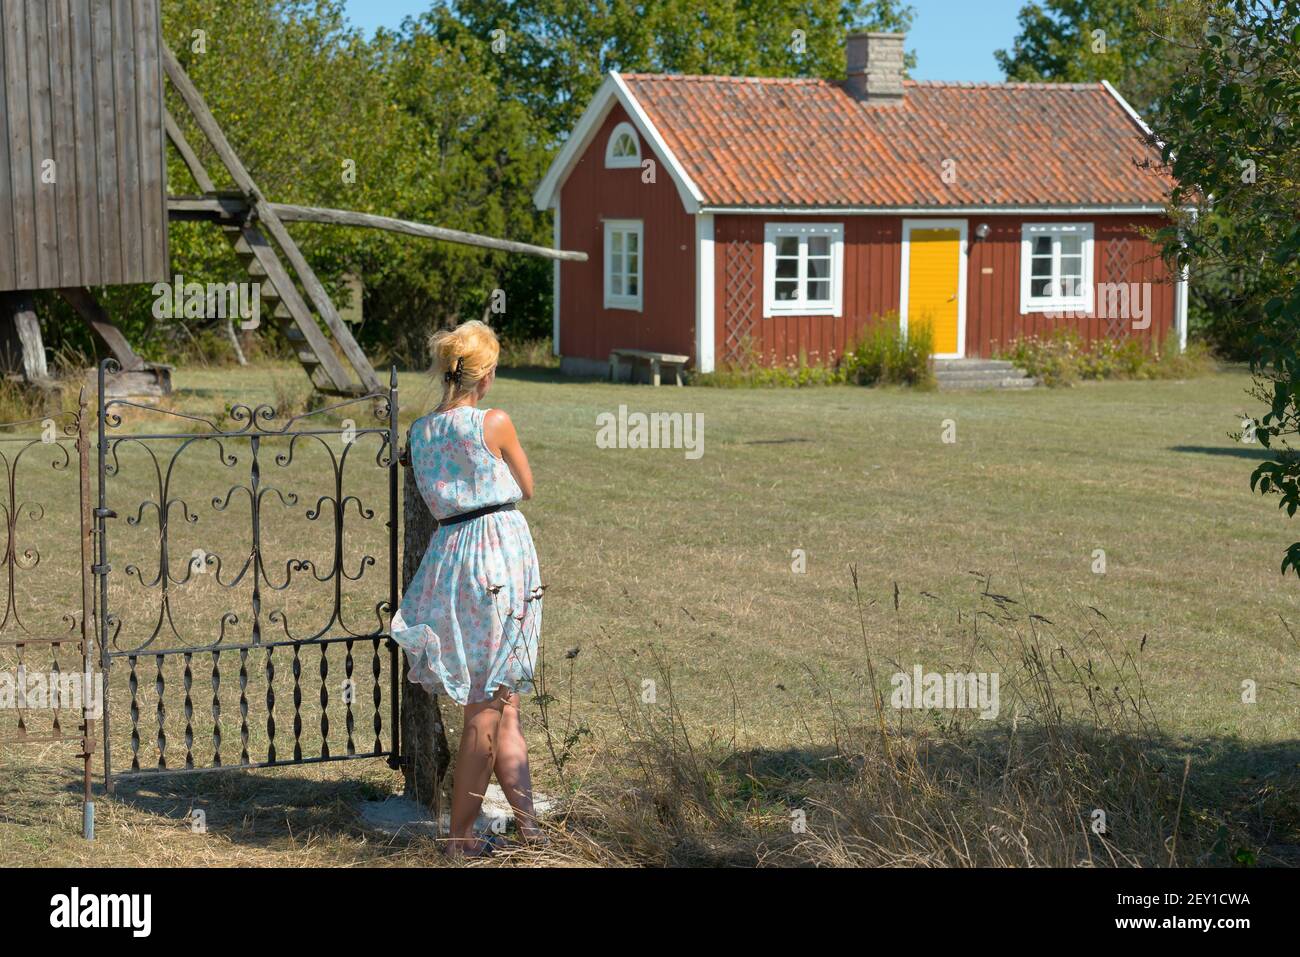 On the island of Oeland, Sweden Stock Photo